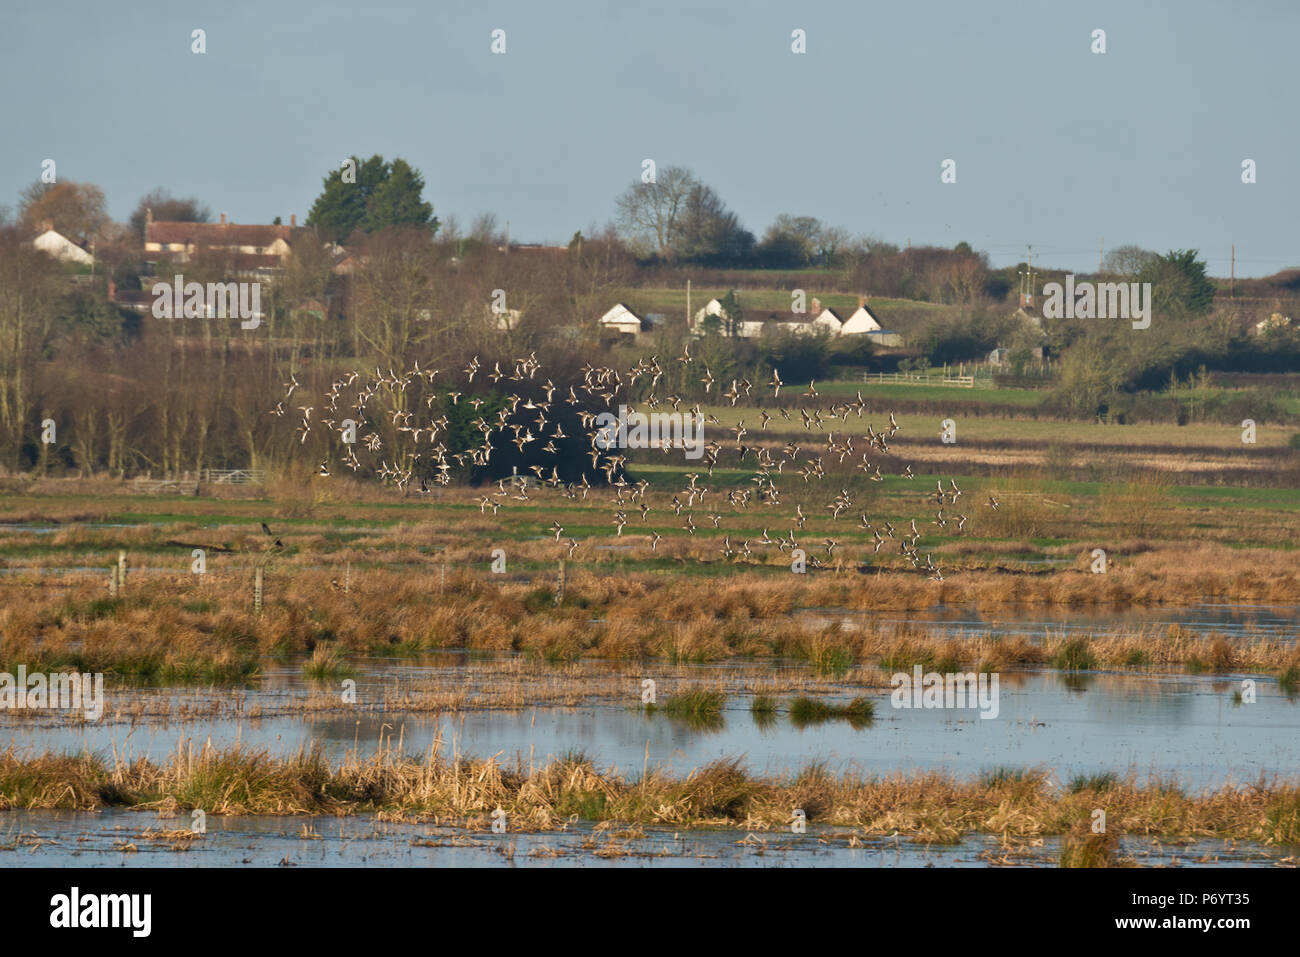 Flocks of waterfowl in flight and on the water at PSPB Nature Reserve at West Sedge Moor on the Somerset Levels during their Big Wetland Duck Watch Stock Photo